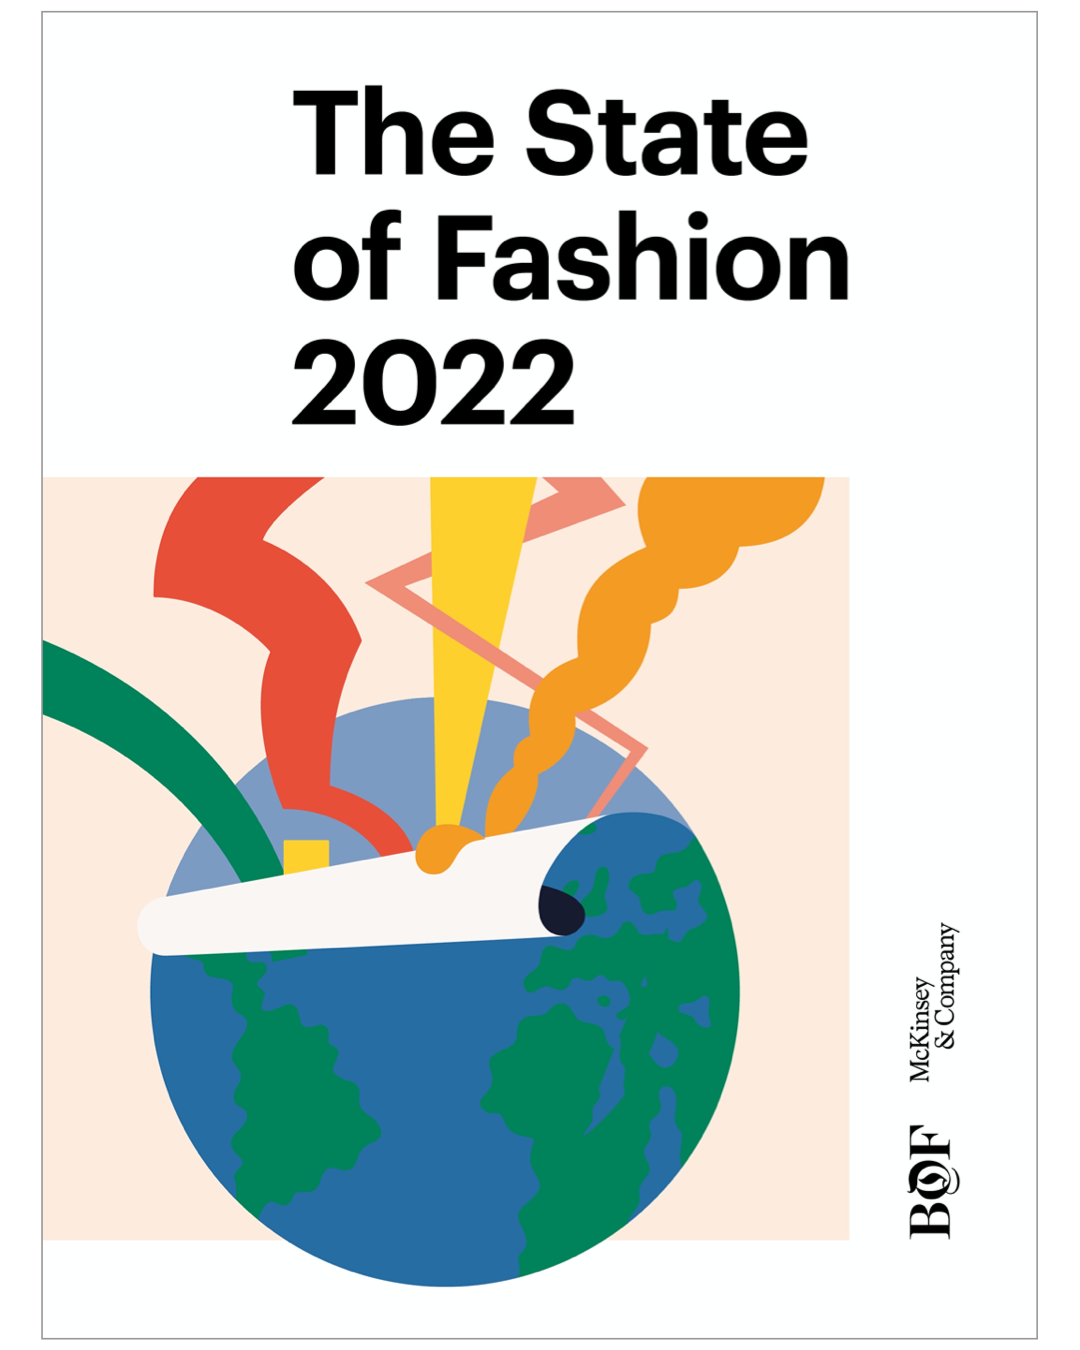 Luxury Brands: Industry Trends in 2022 - Recommend